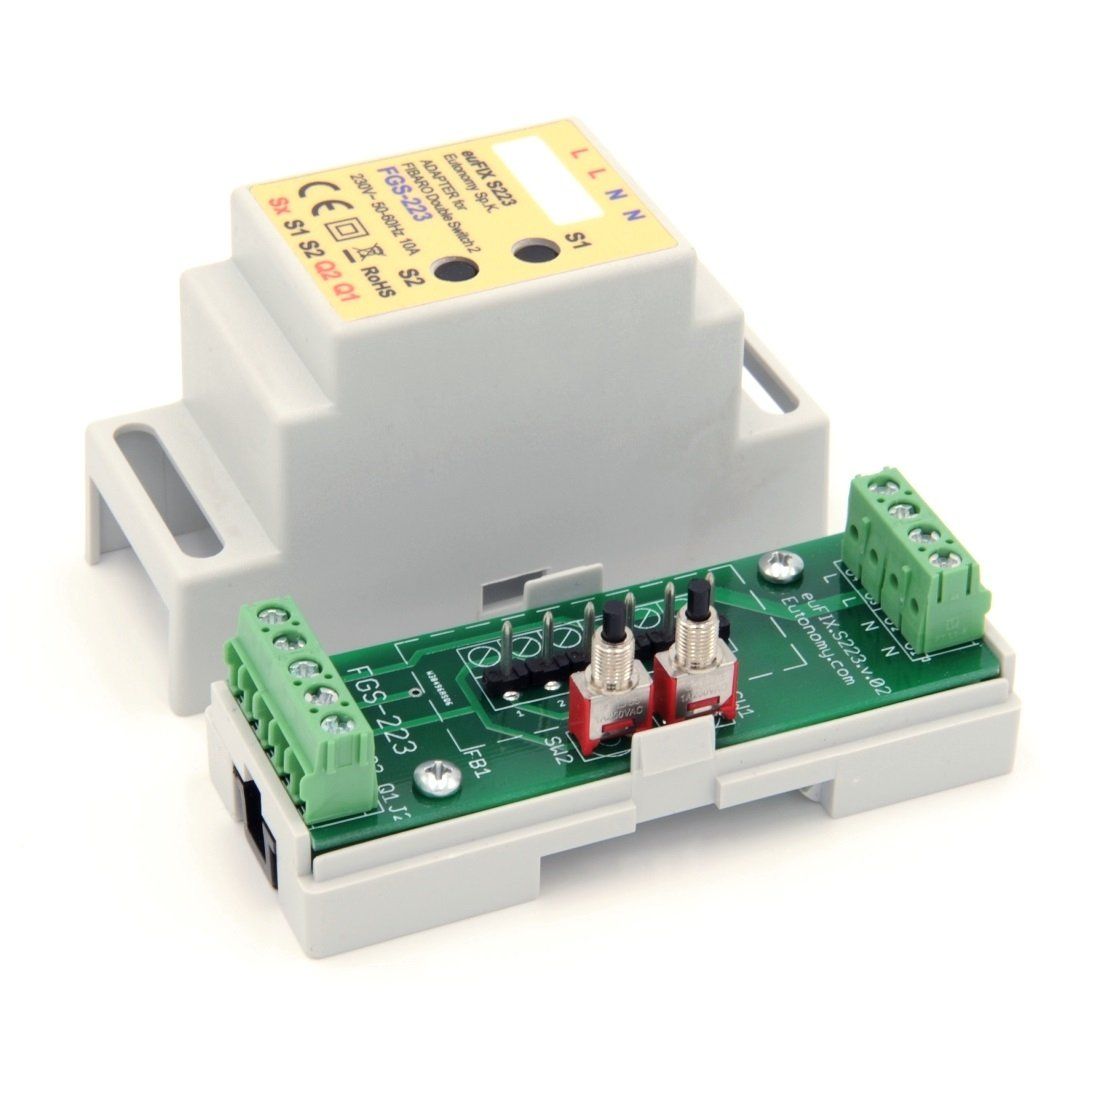 Eutonomy euFIX Adapter DIN for Fibaro Double Switch 2 (with Push-Buttons) Migration_Modules Eutonomy 